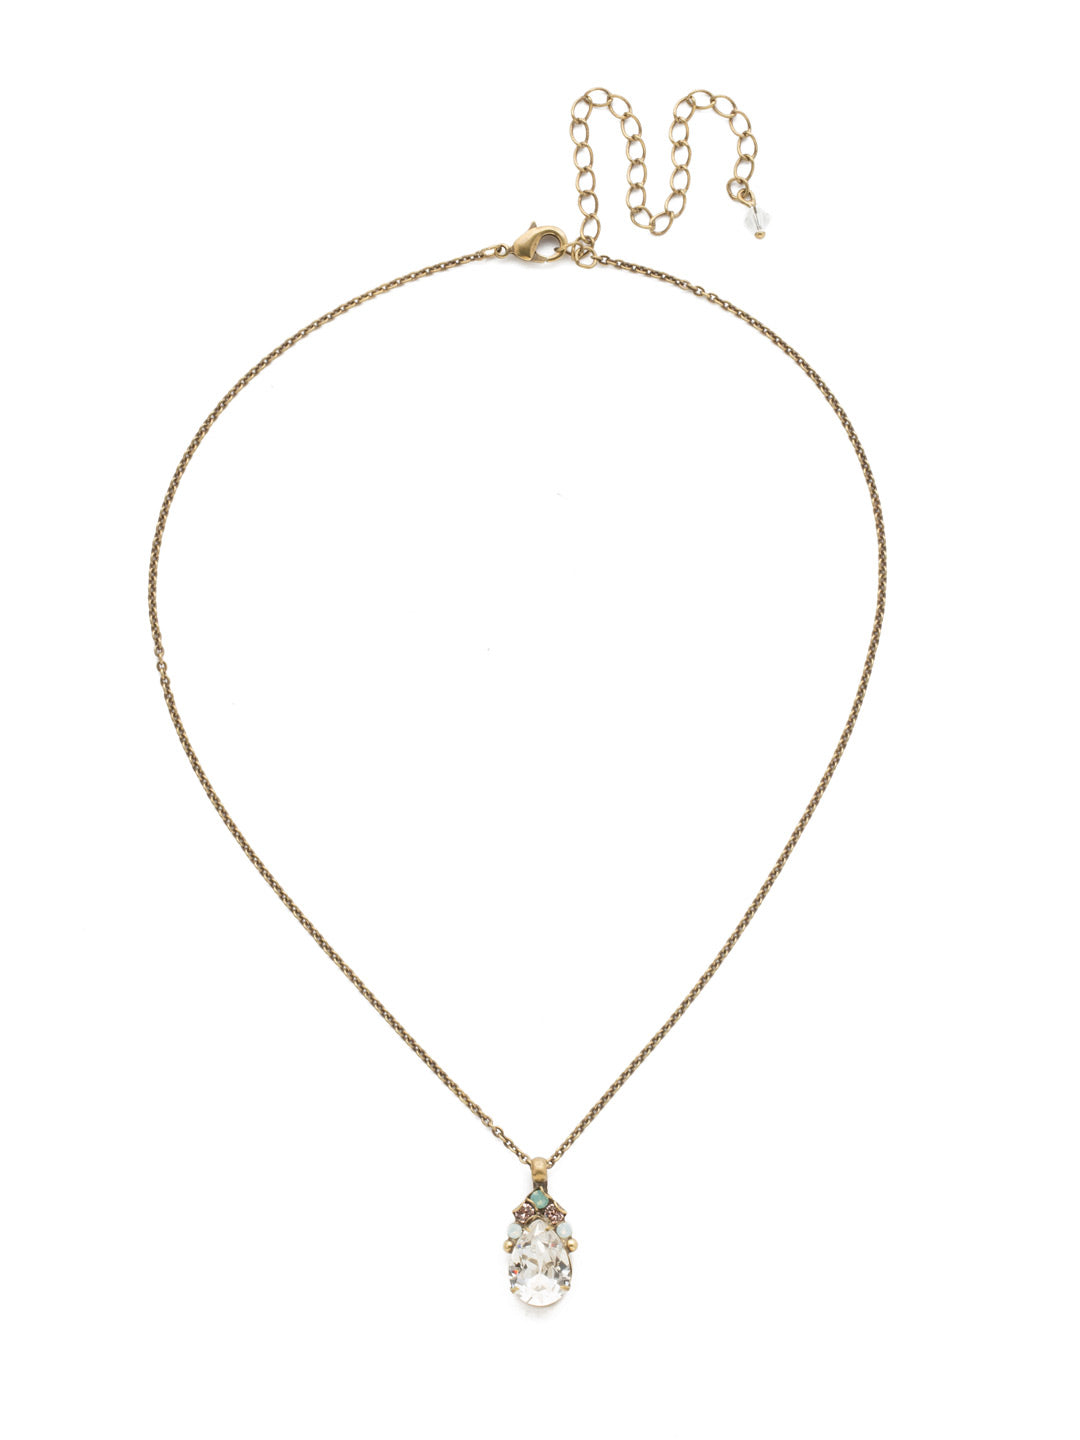 Timeless Tiara Necklace - NDQ44AGWMA - <p>A delicate teardrop pendant sprinkled with dainty details on top. From Sorrelli's White Magnolia collection in our Antique Gold-tone finish.</p>